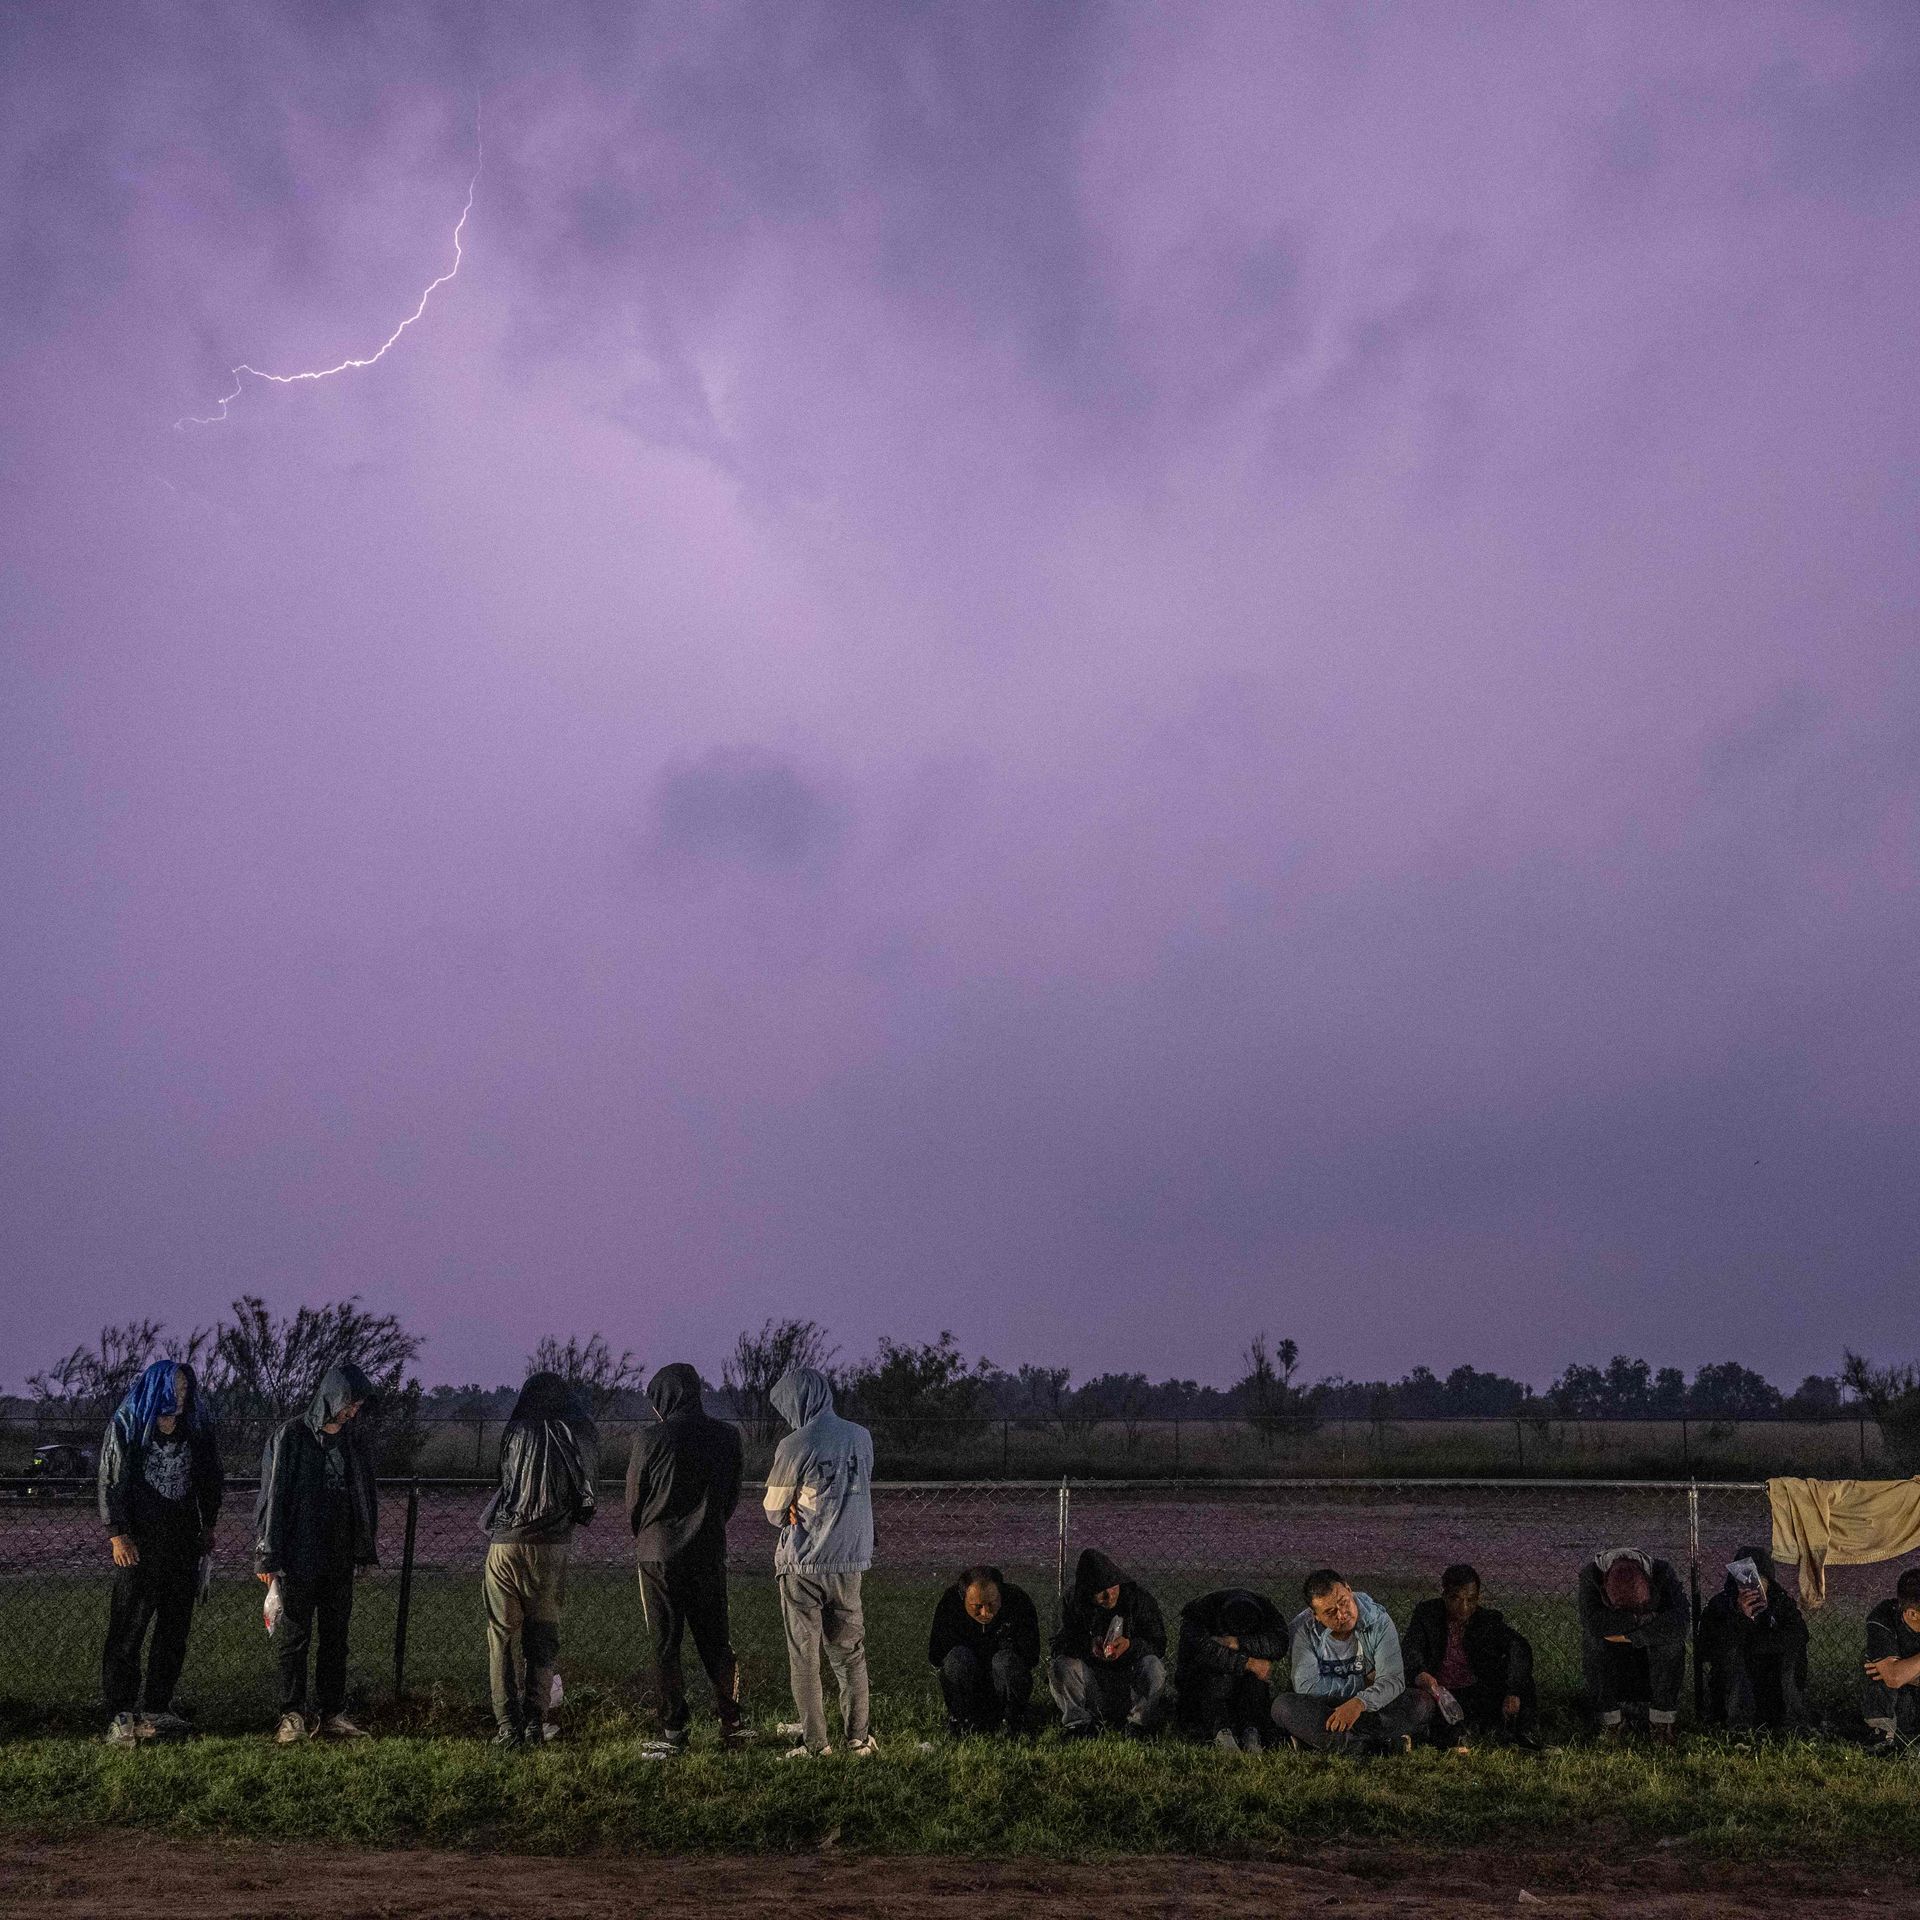 Migrants wait in the rain after turning themselves over to US Border Patrol agents after crossing over from Mexico in Fronton, Texas 